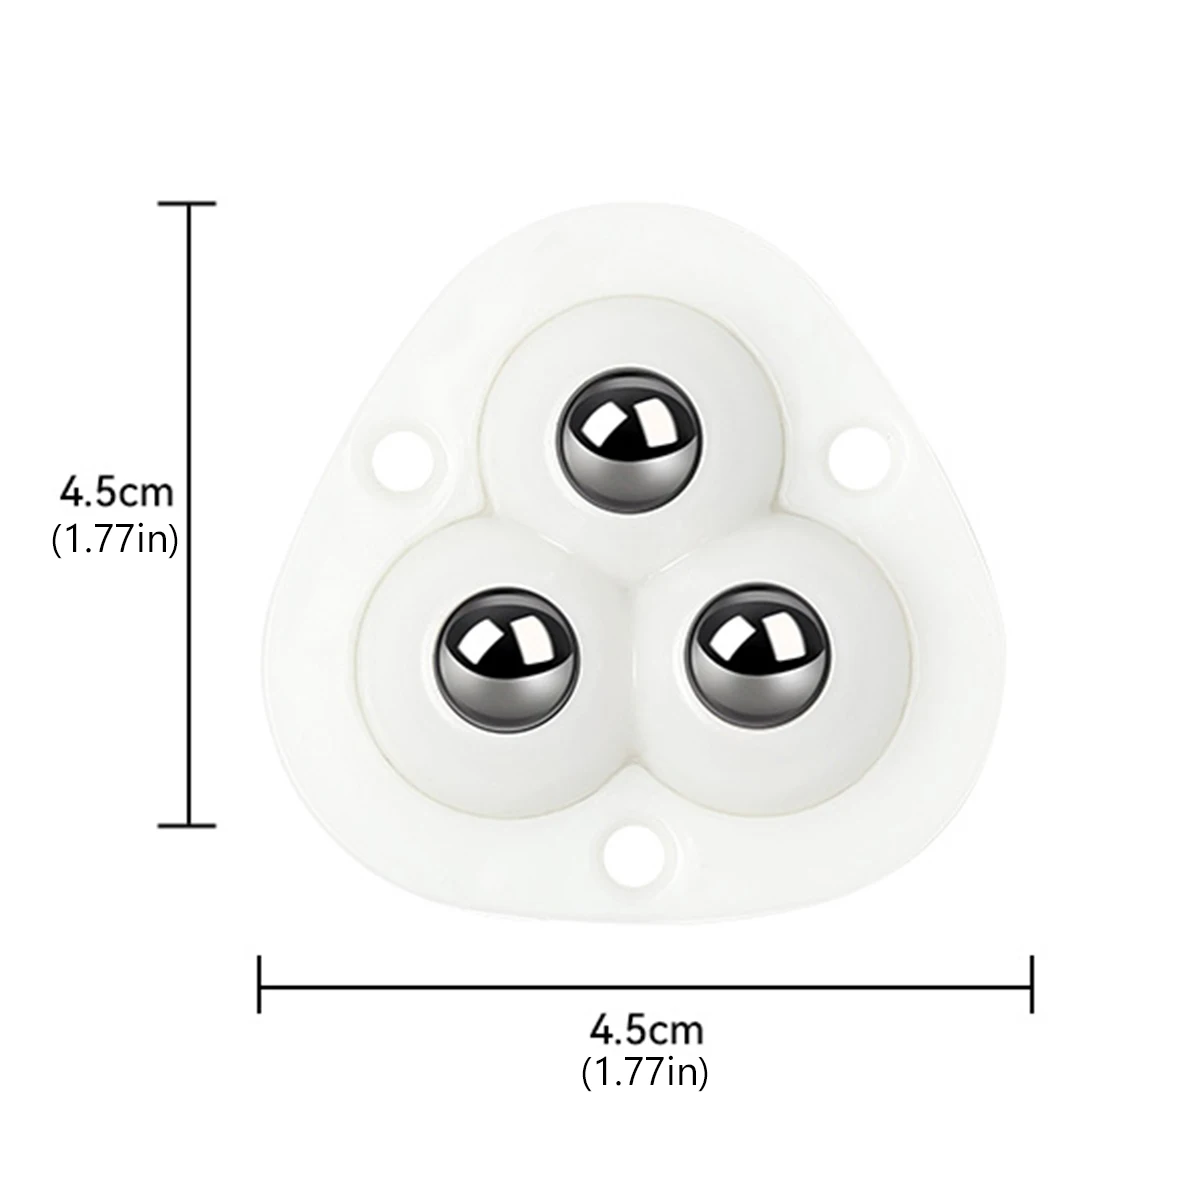 16Pcs caster wheels for small appliances Adhesive Wheels Caster